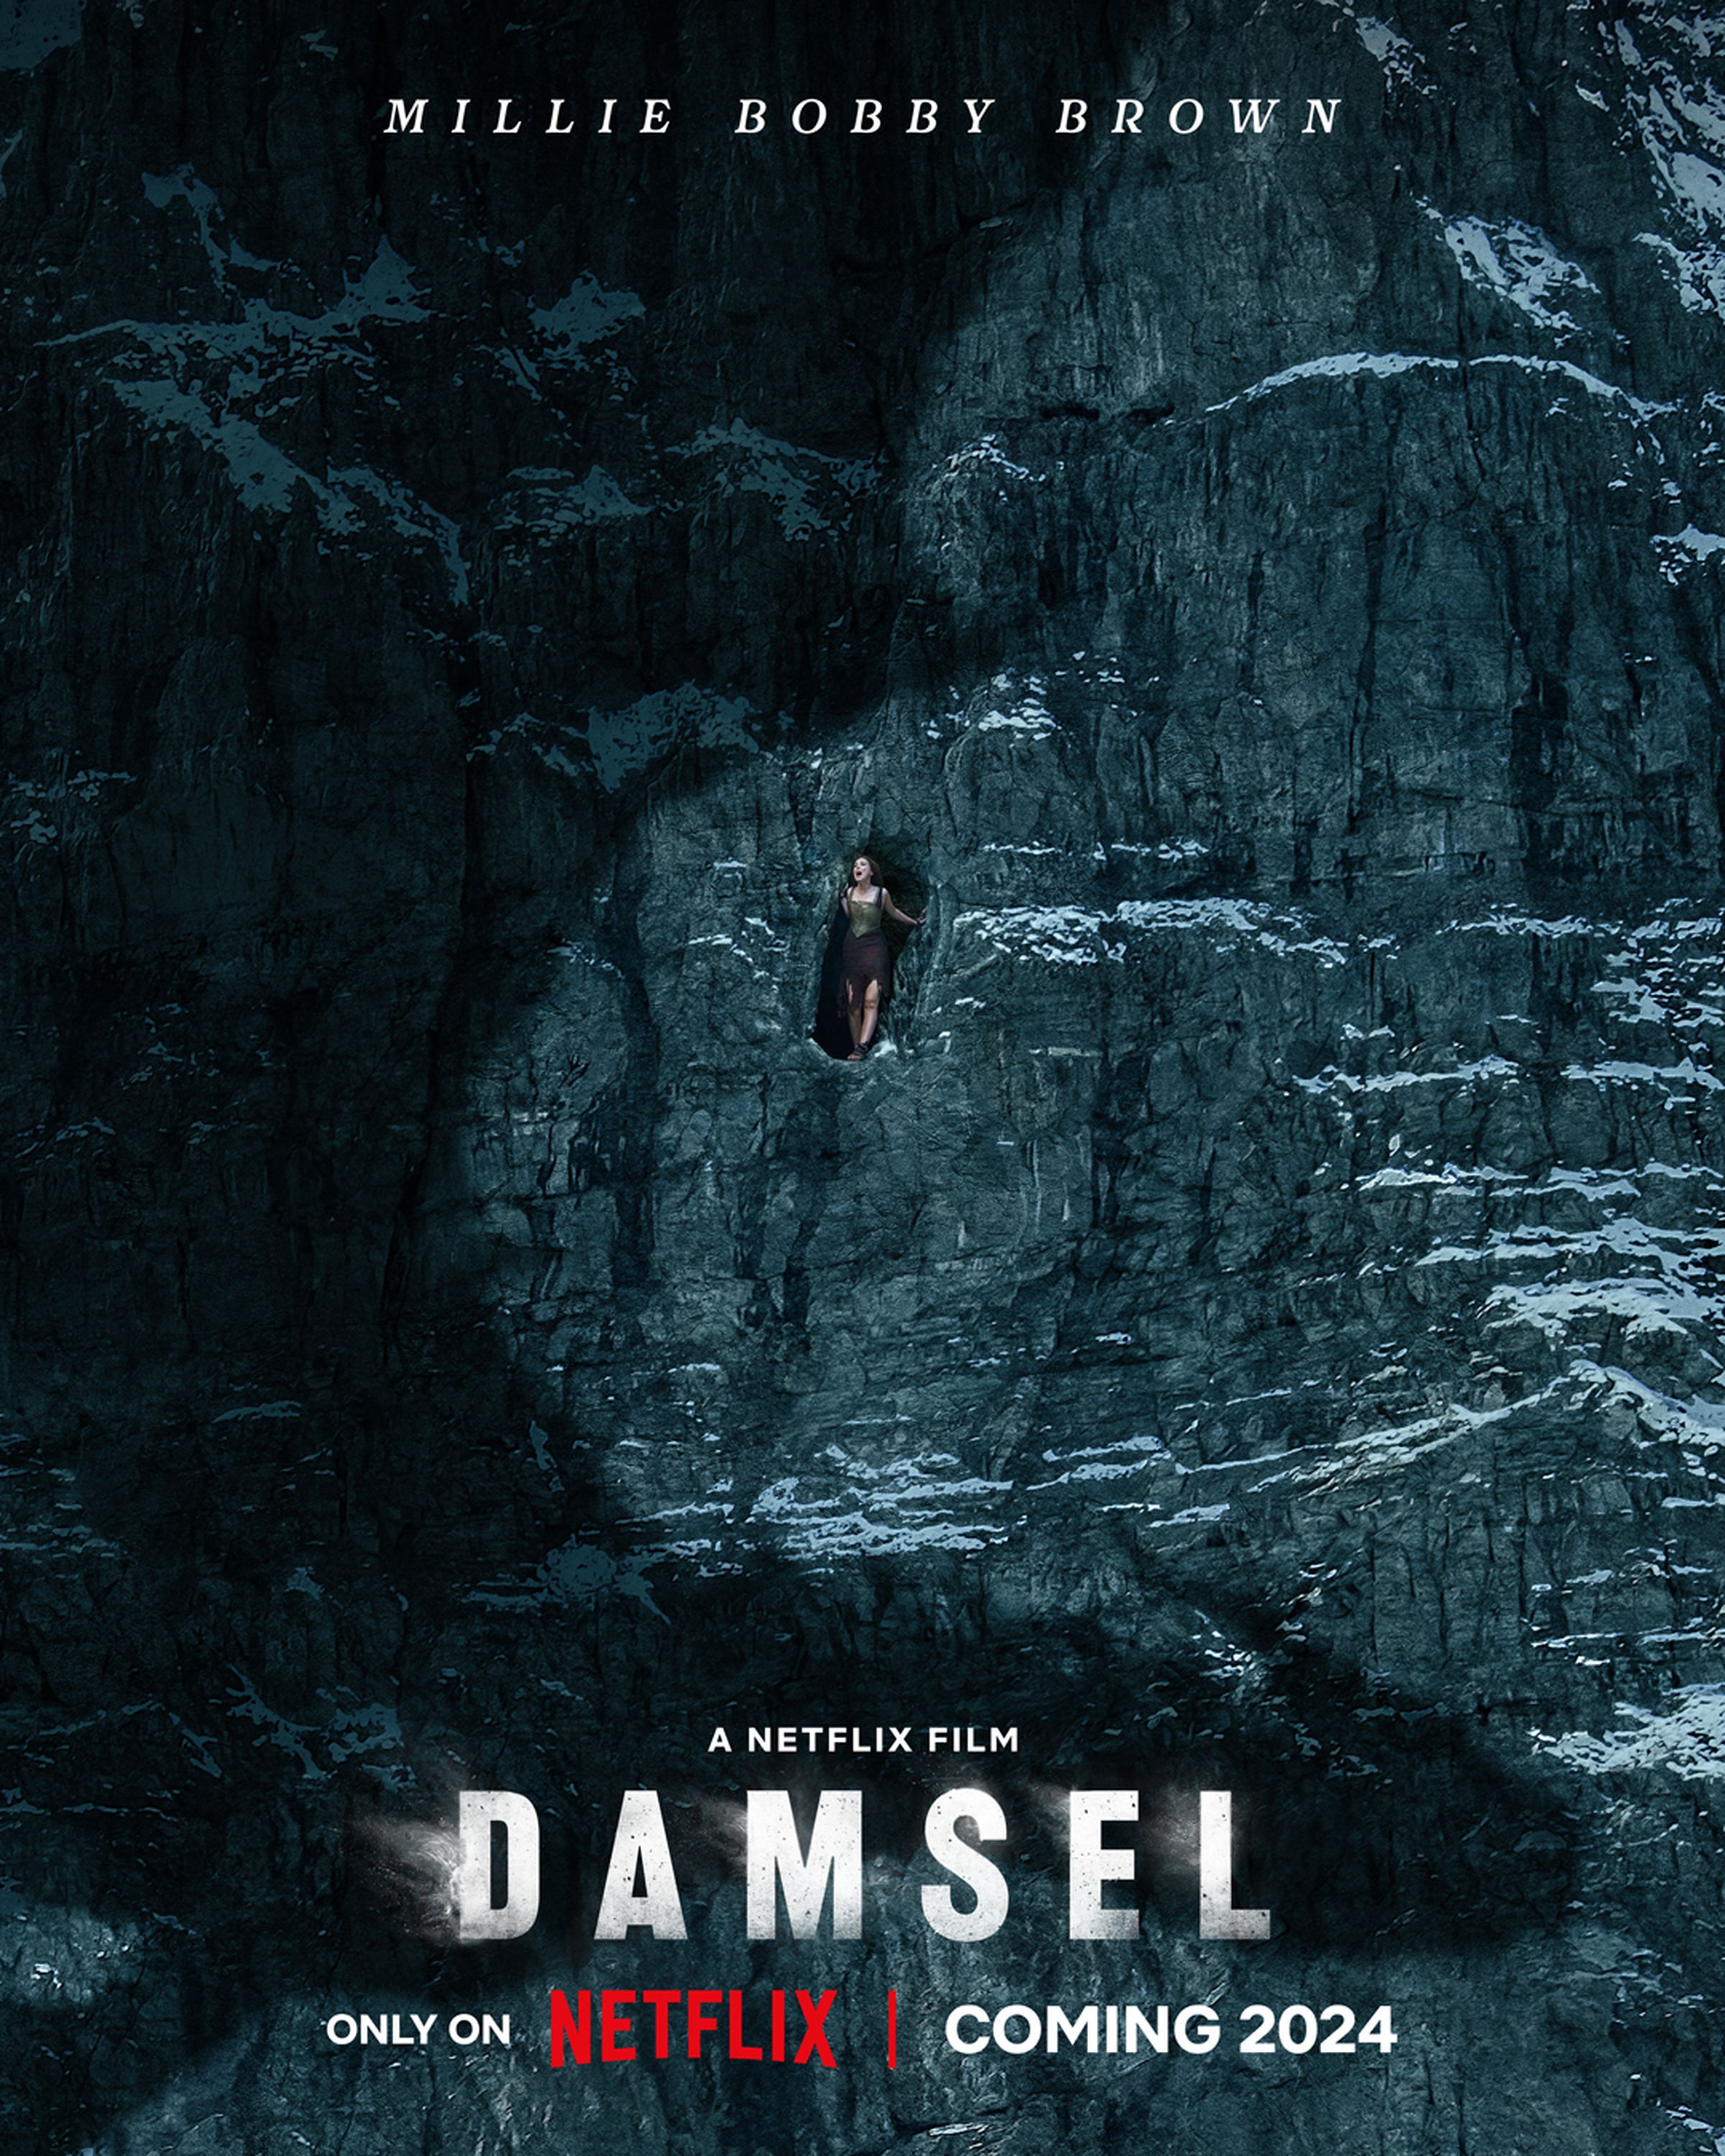 A poster for the Netflix film Damsel.